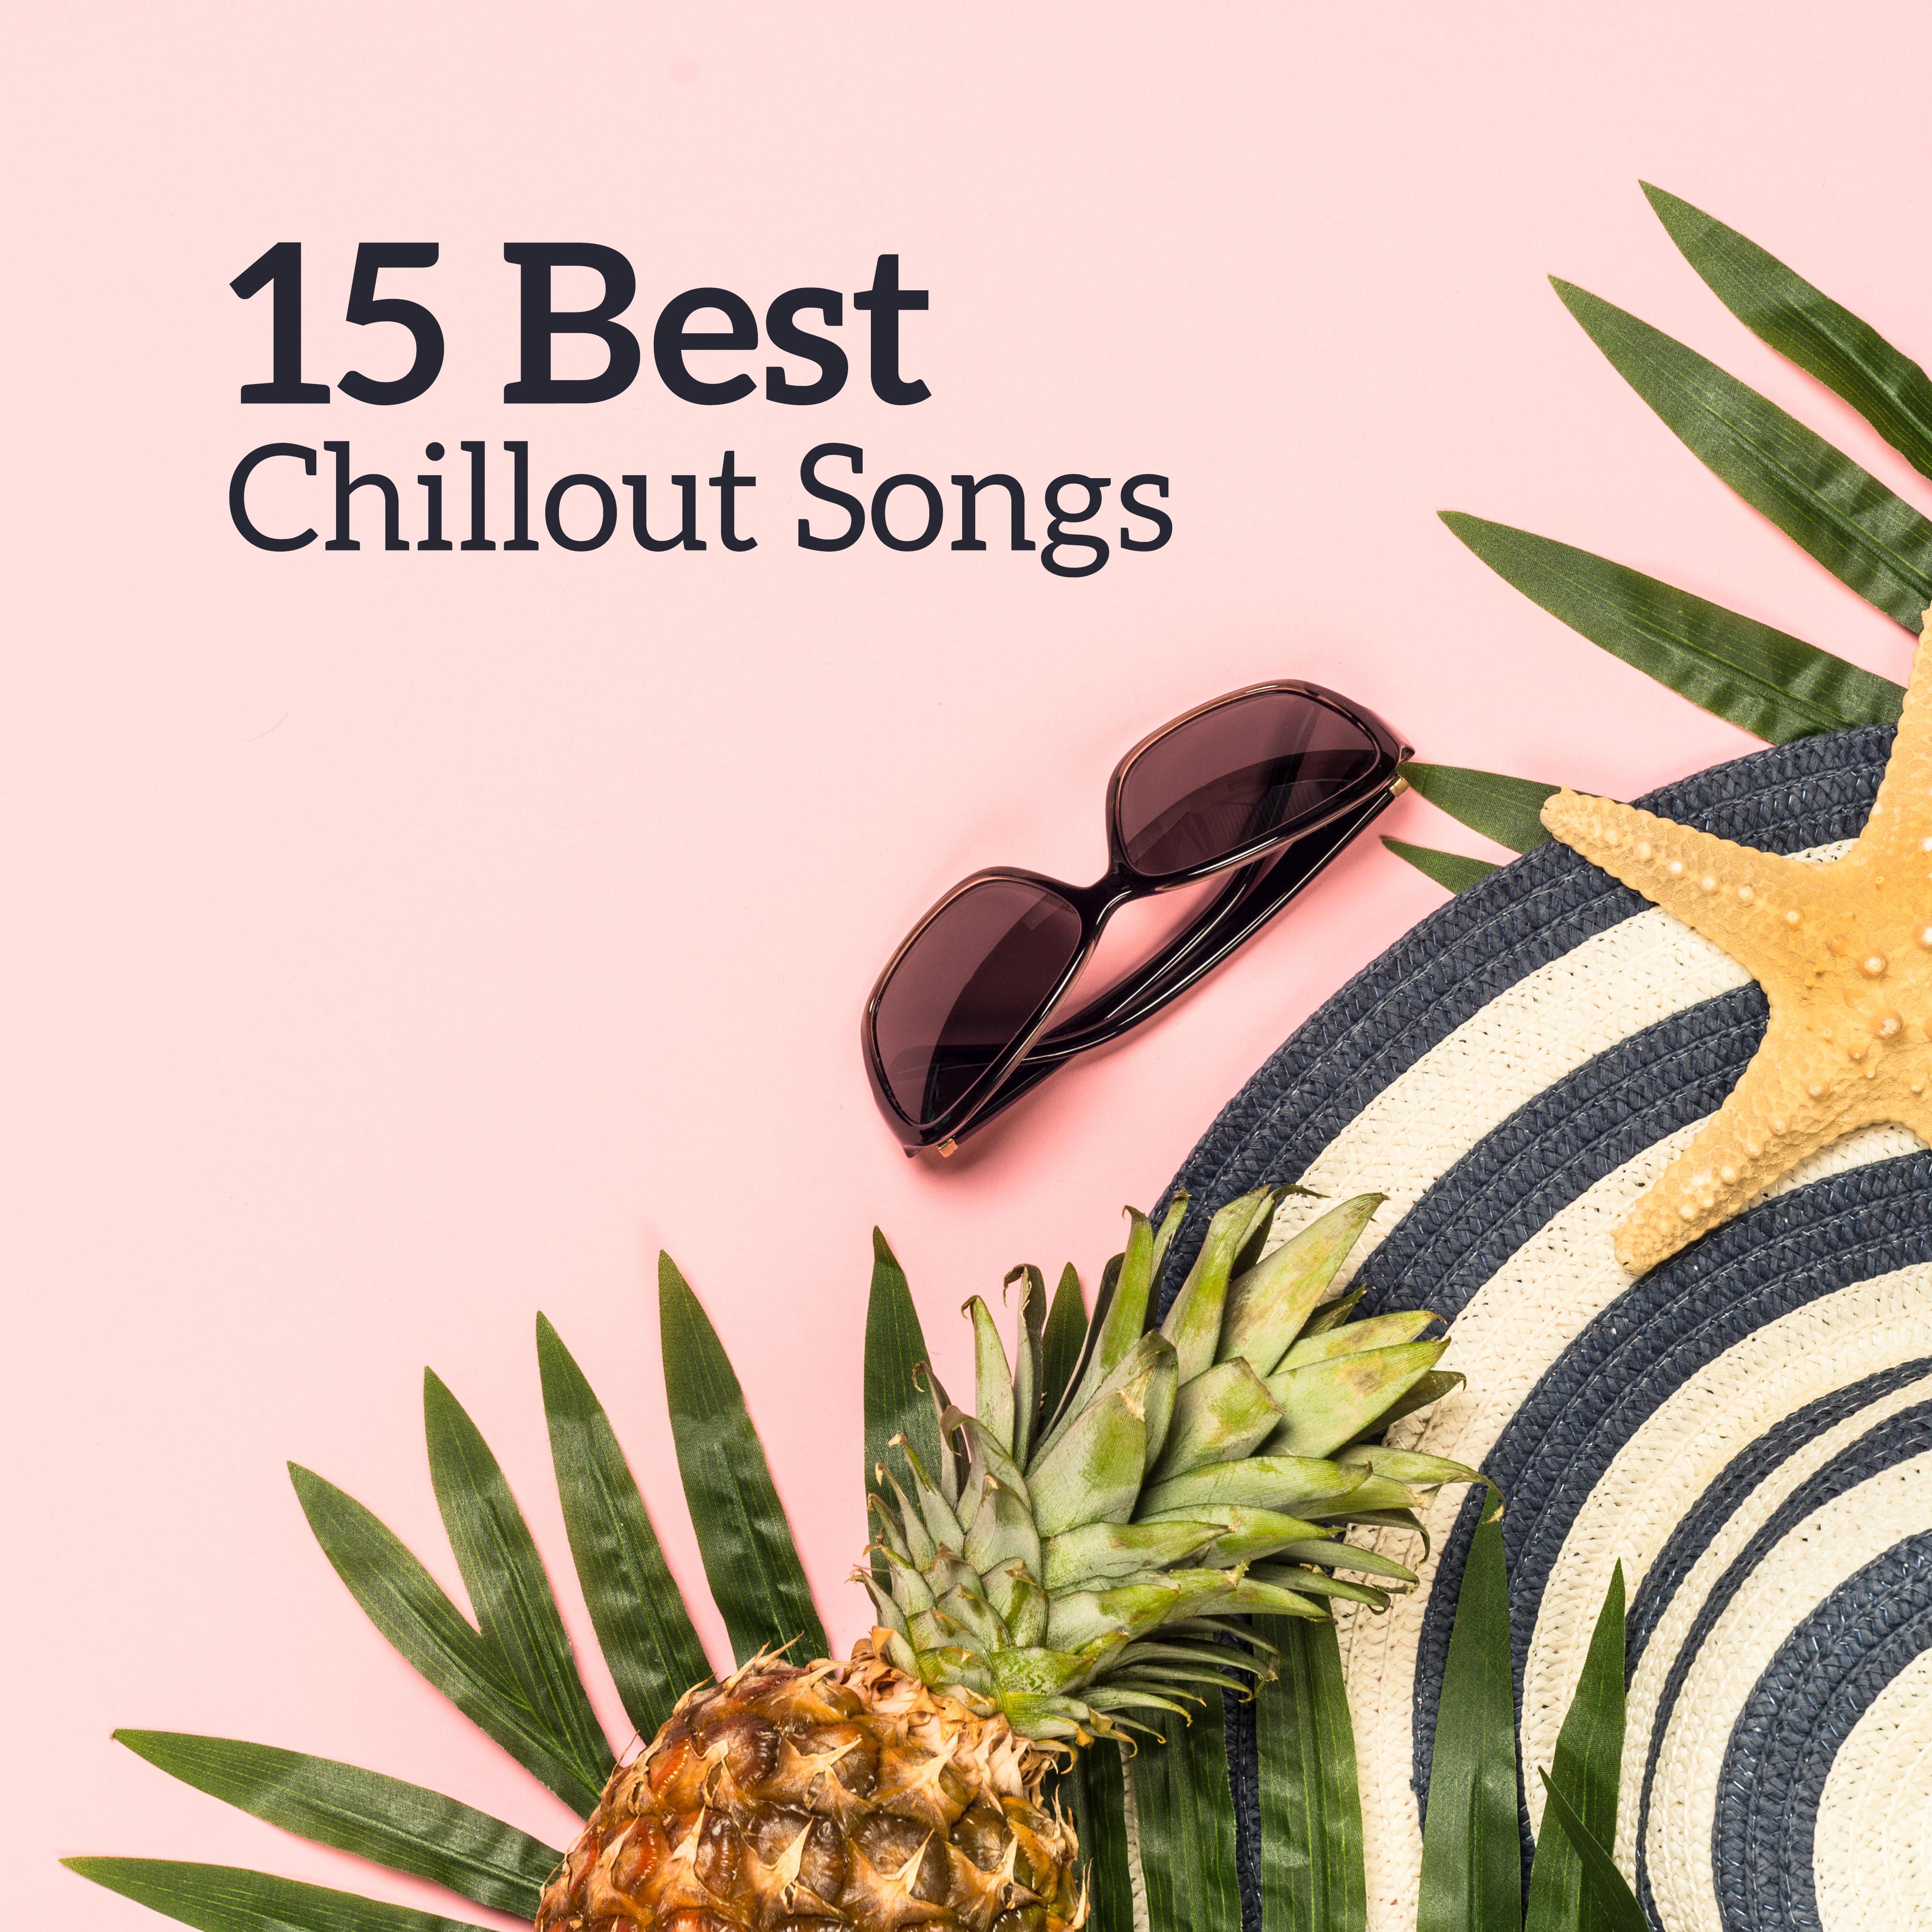 15 Best Chillout Songs  Ibiza Chill Out, Music Zone, Summer Music 2019, Inner Harmony, Relaxing Music Therapy, Beach Chillout